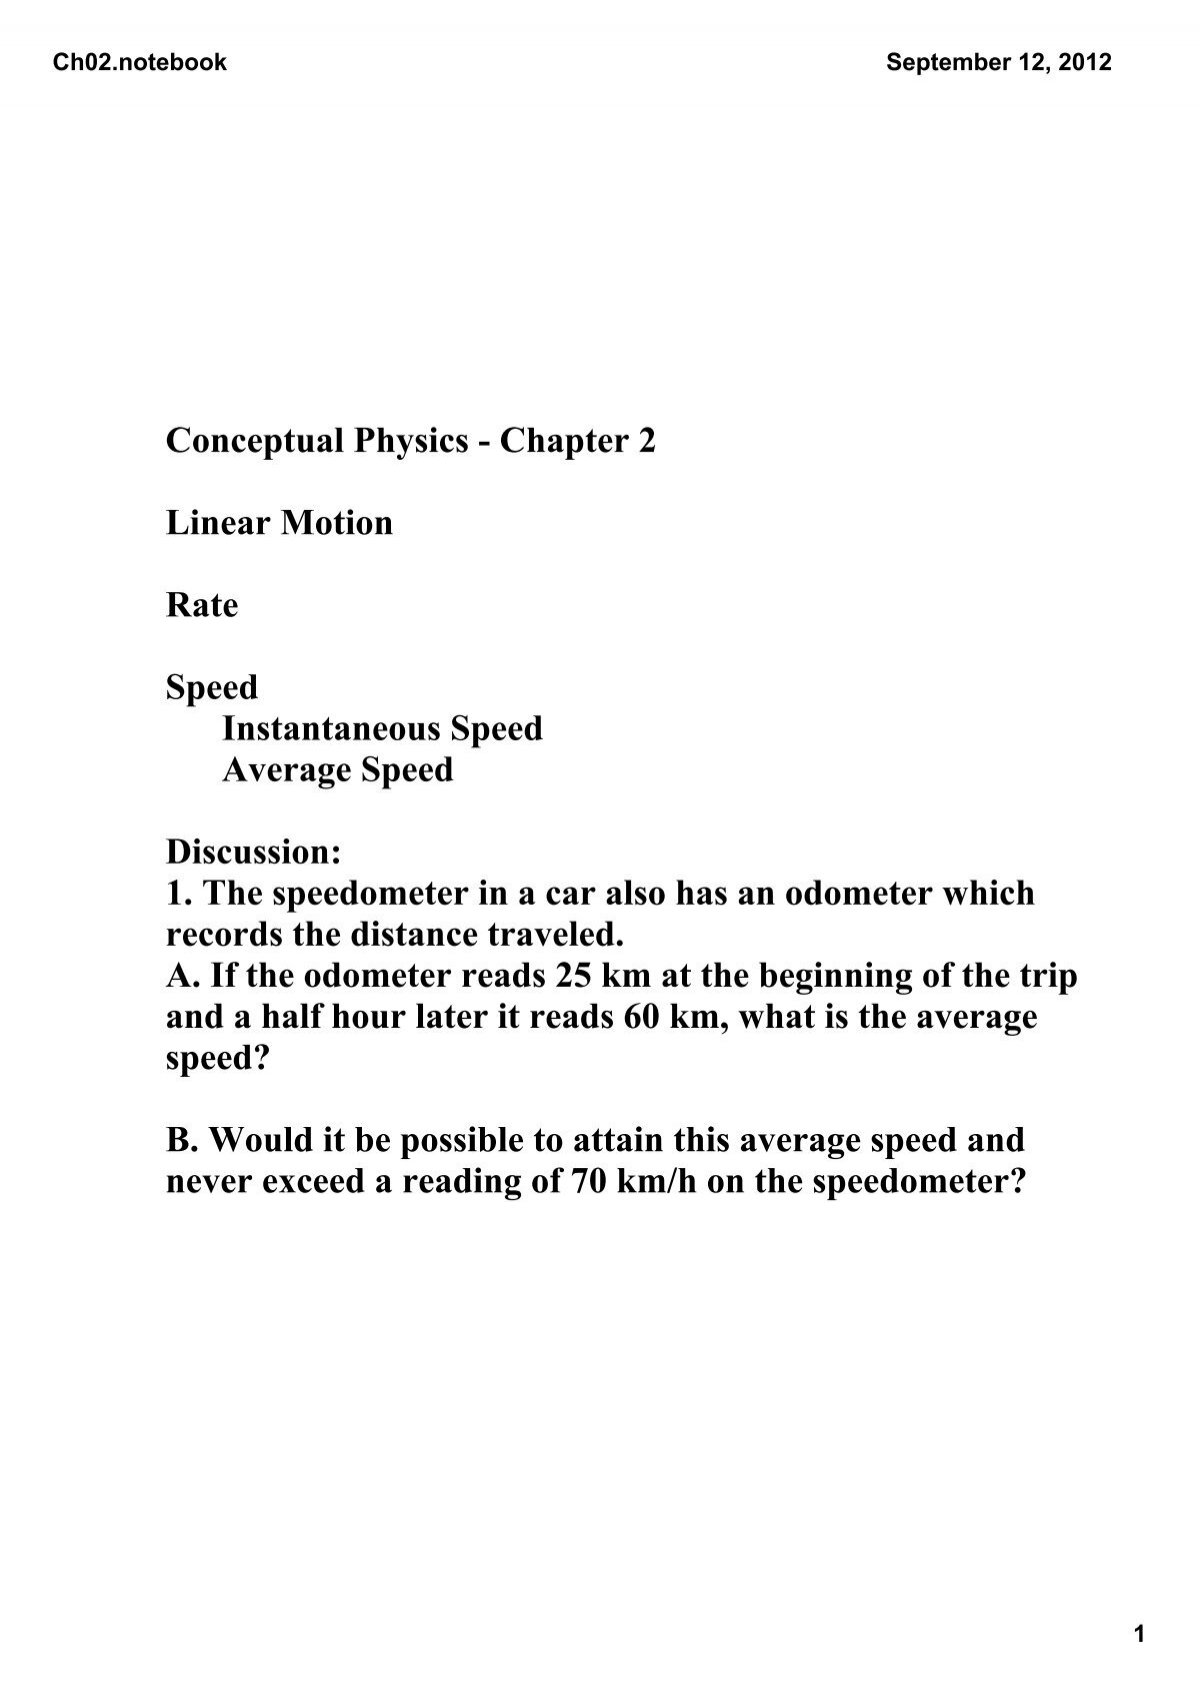 conceptual-physics-chapter-2-linear-motion-rate-iona-physics